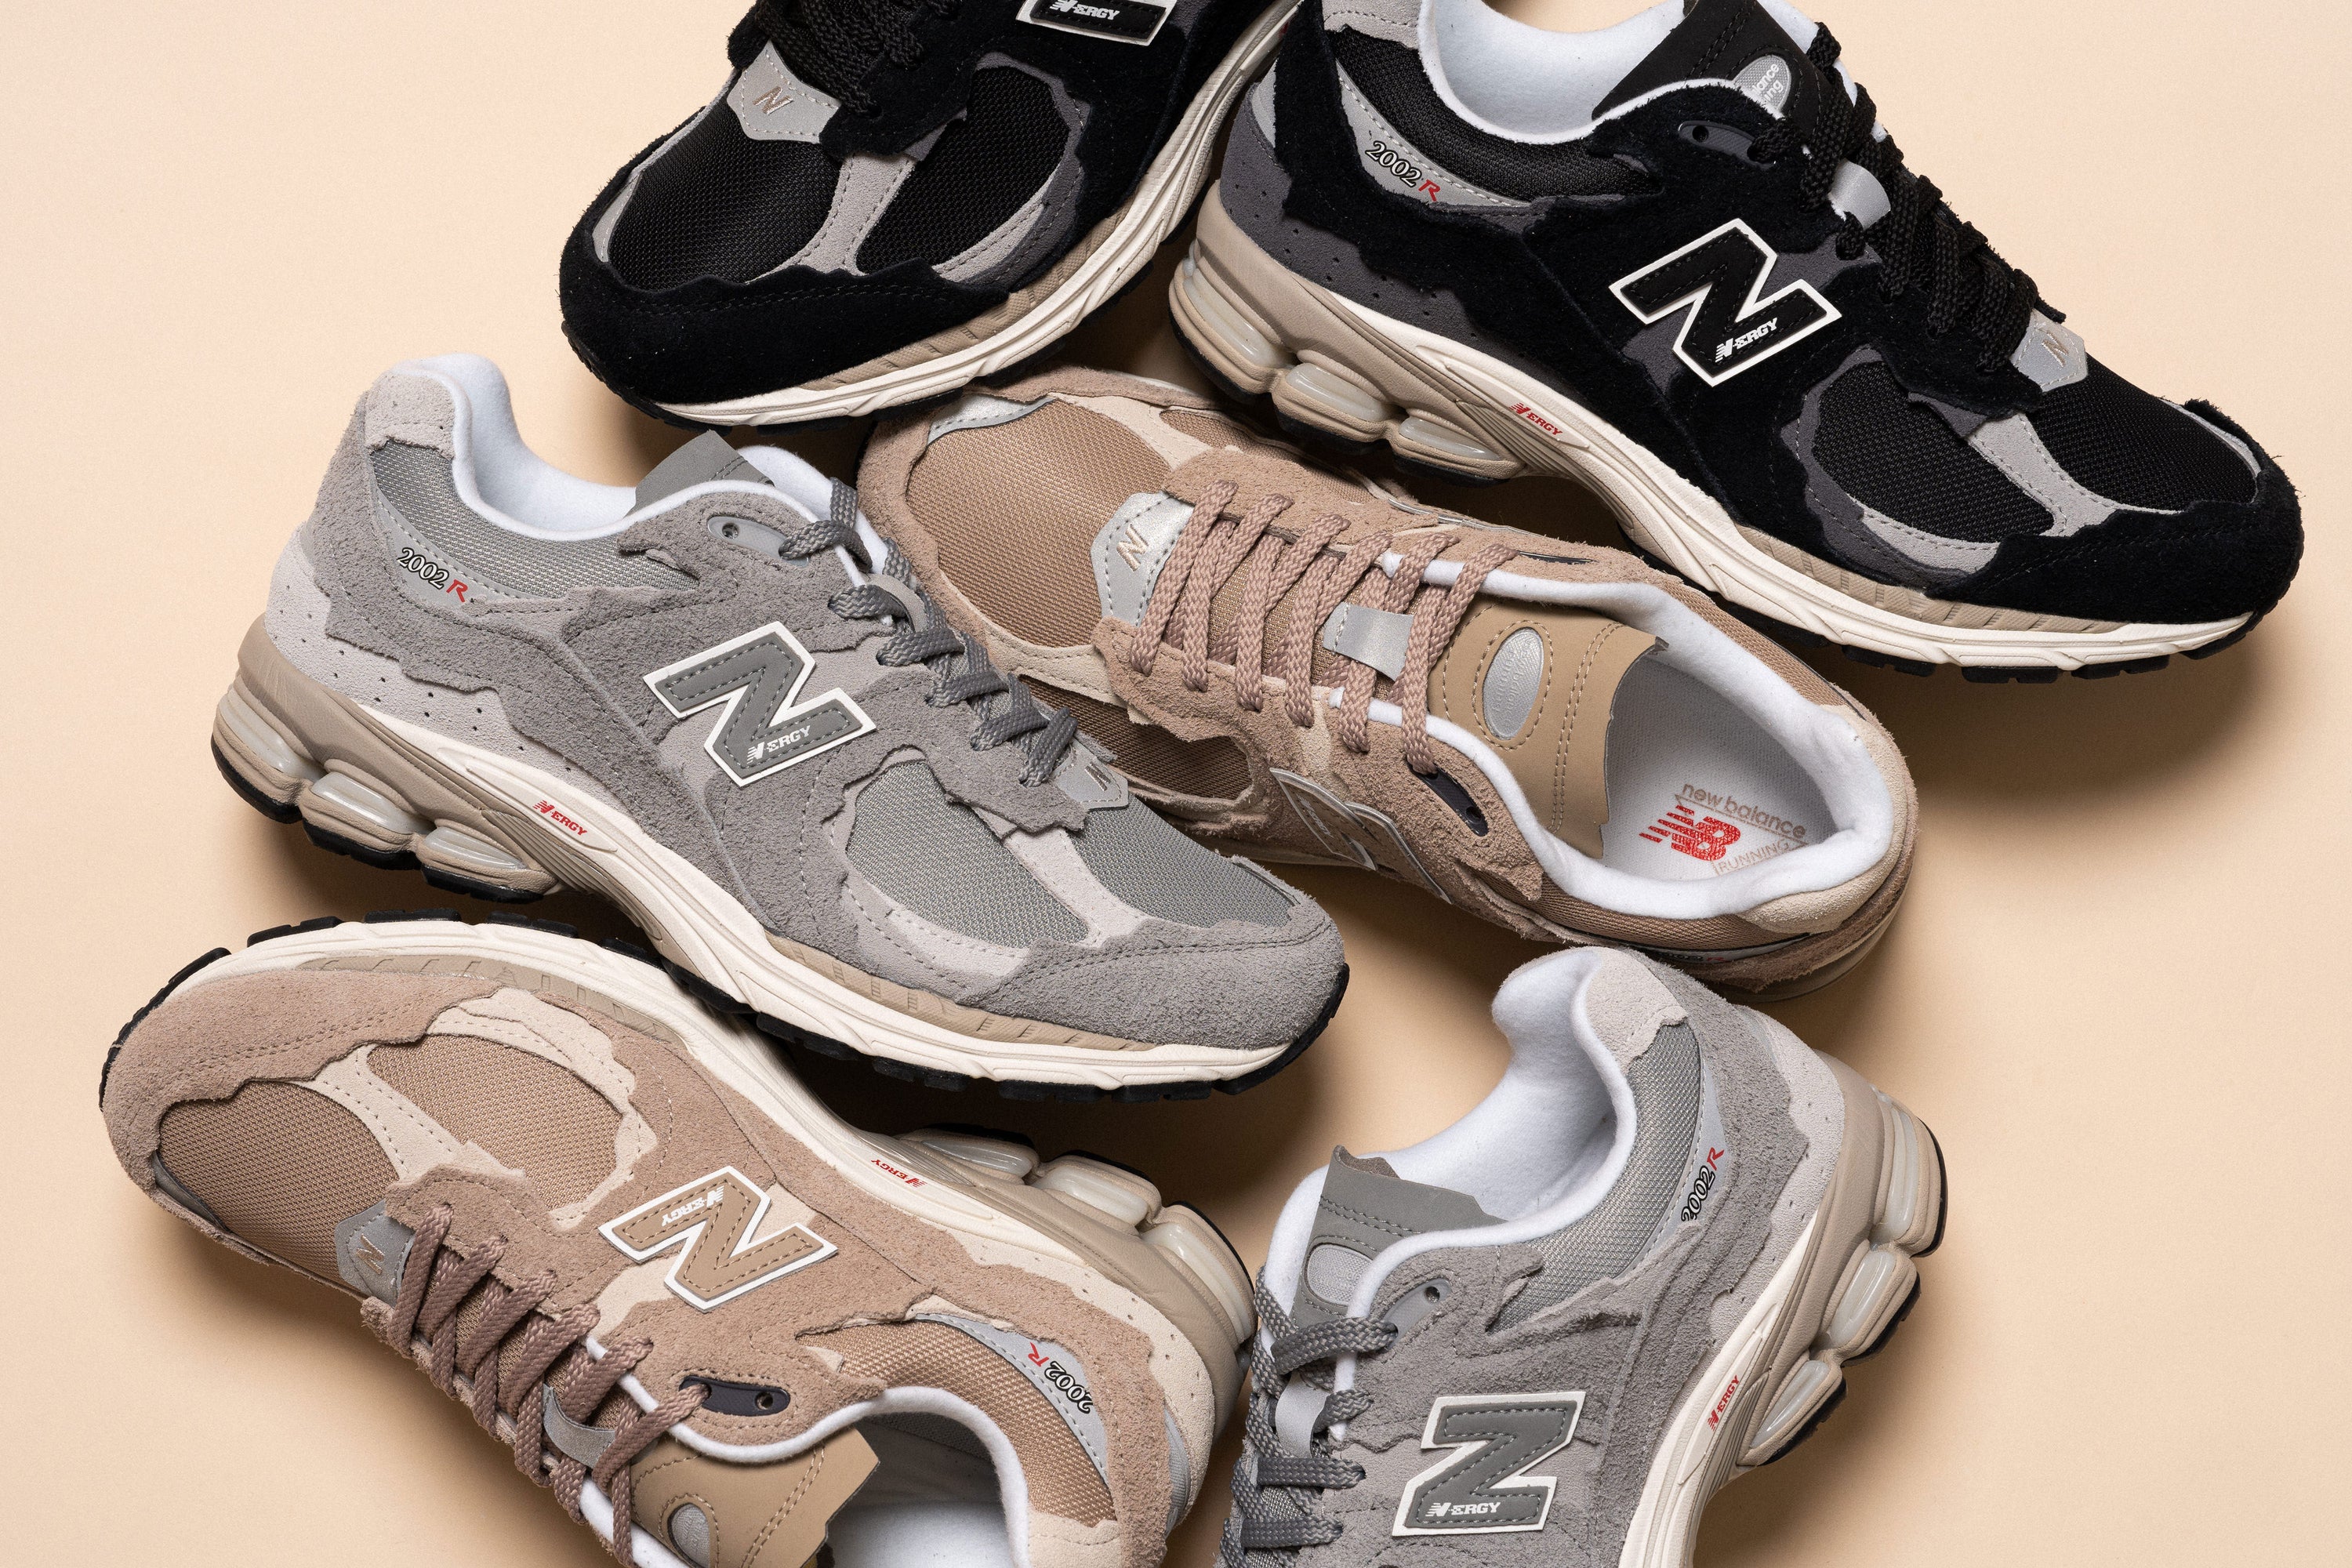 New Balance Refined Future Pack 27/4/23